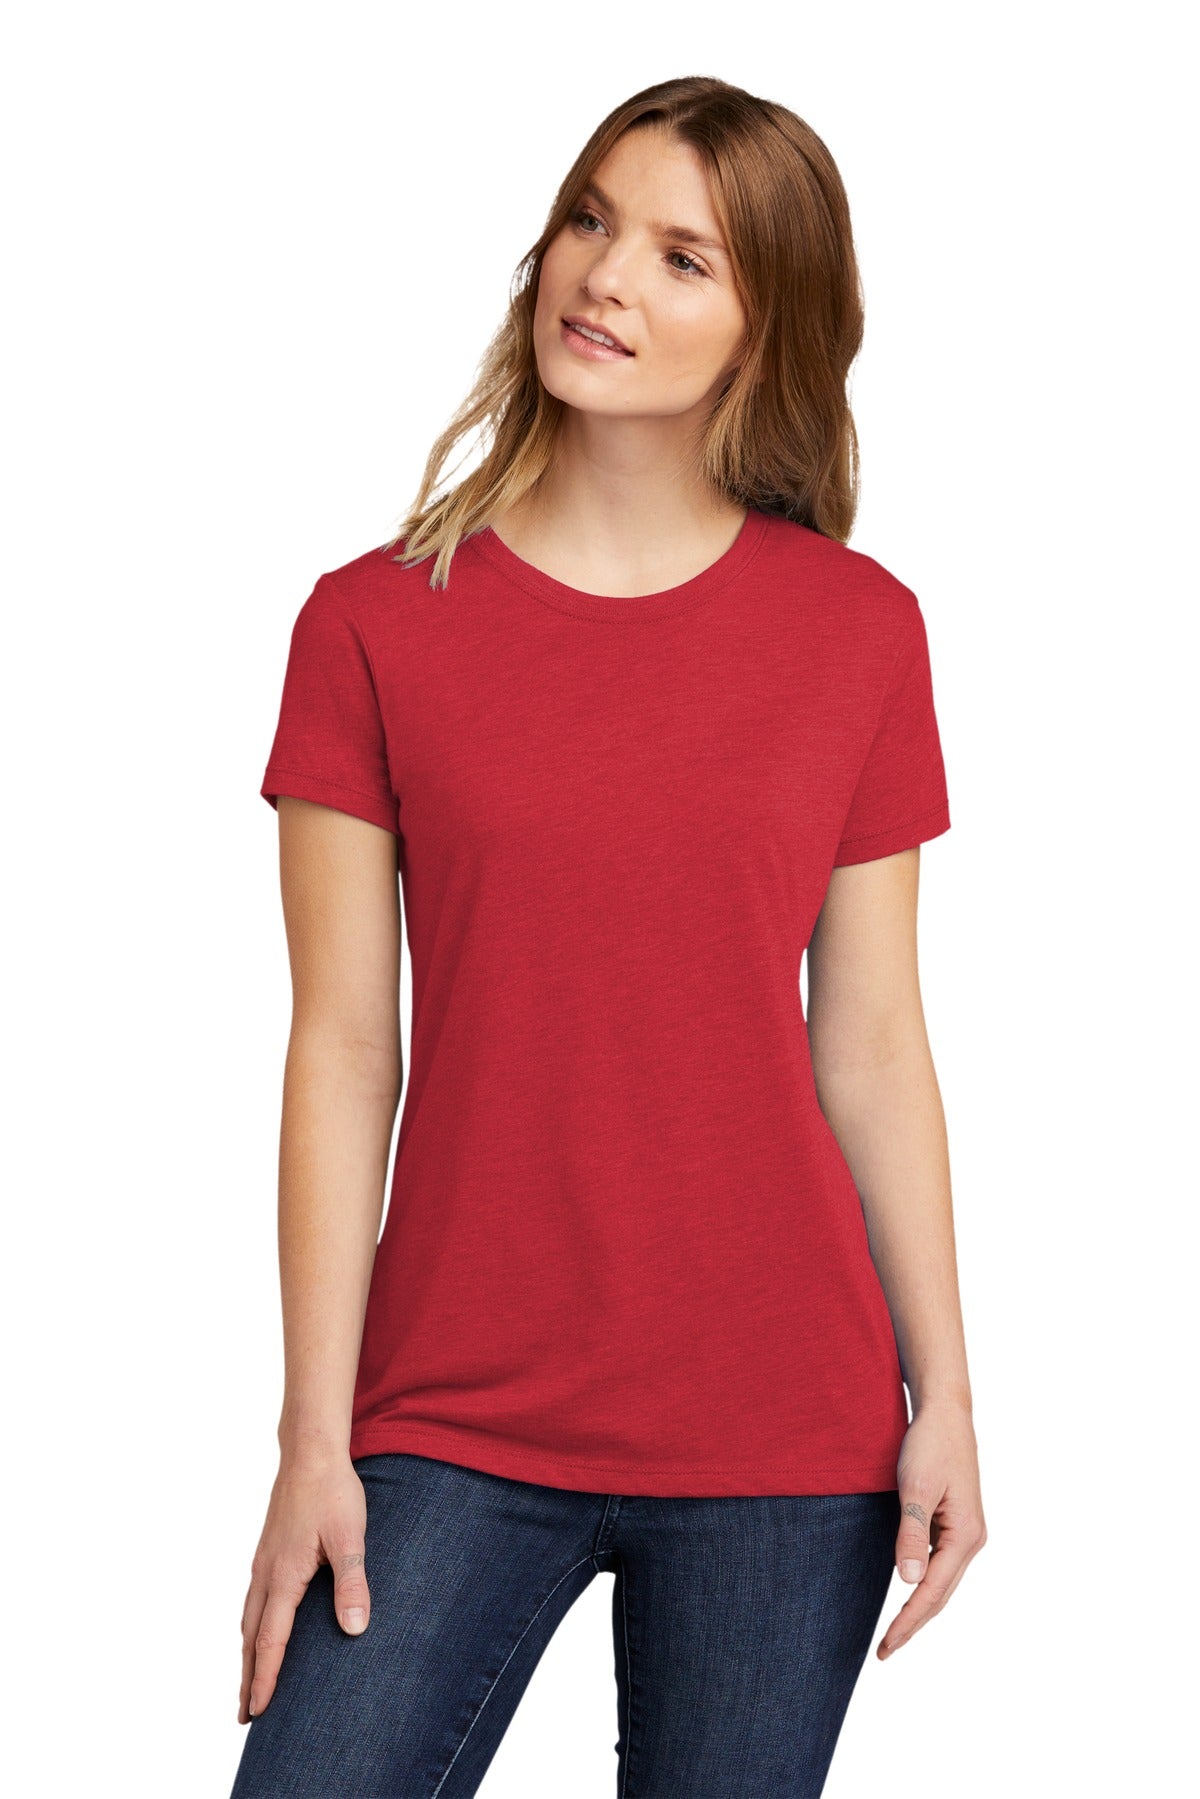 NL6610-Red-XS